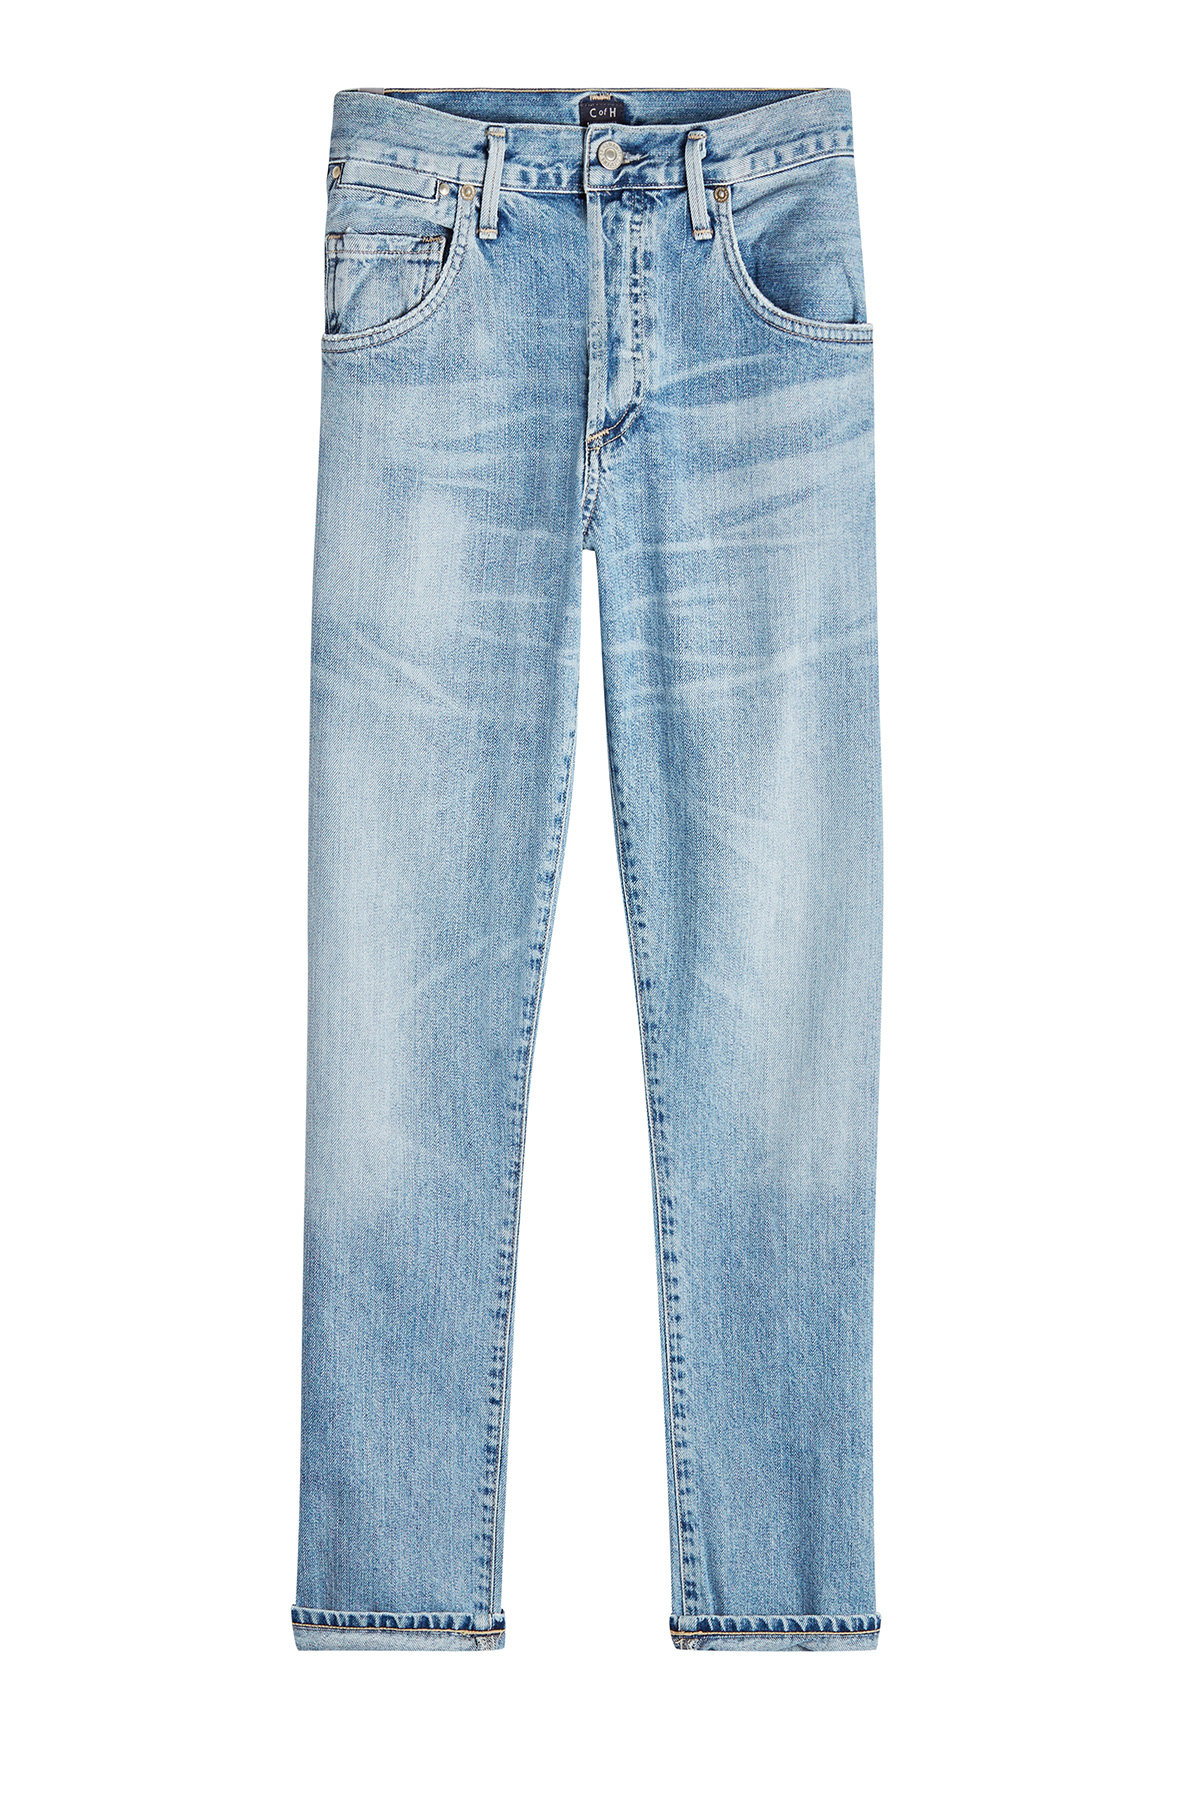 Sunday Morning Emerson Cropped Jeans by Citizens of Humanity